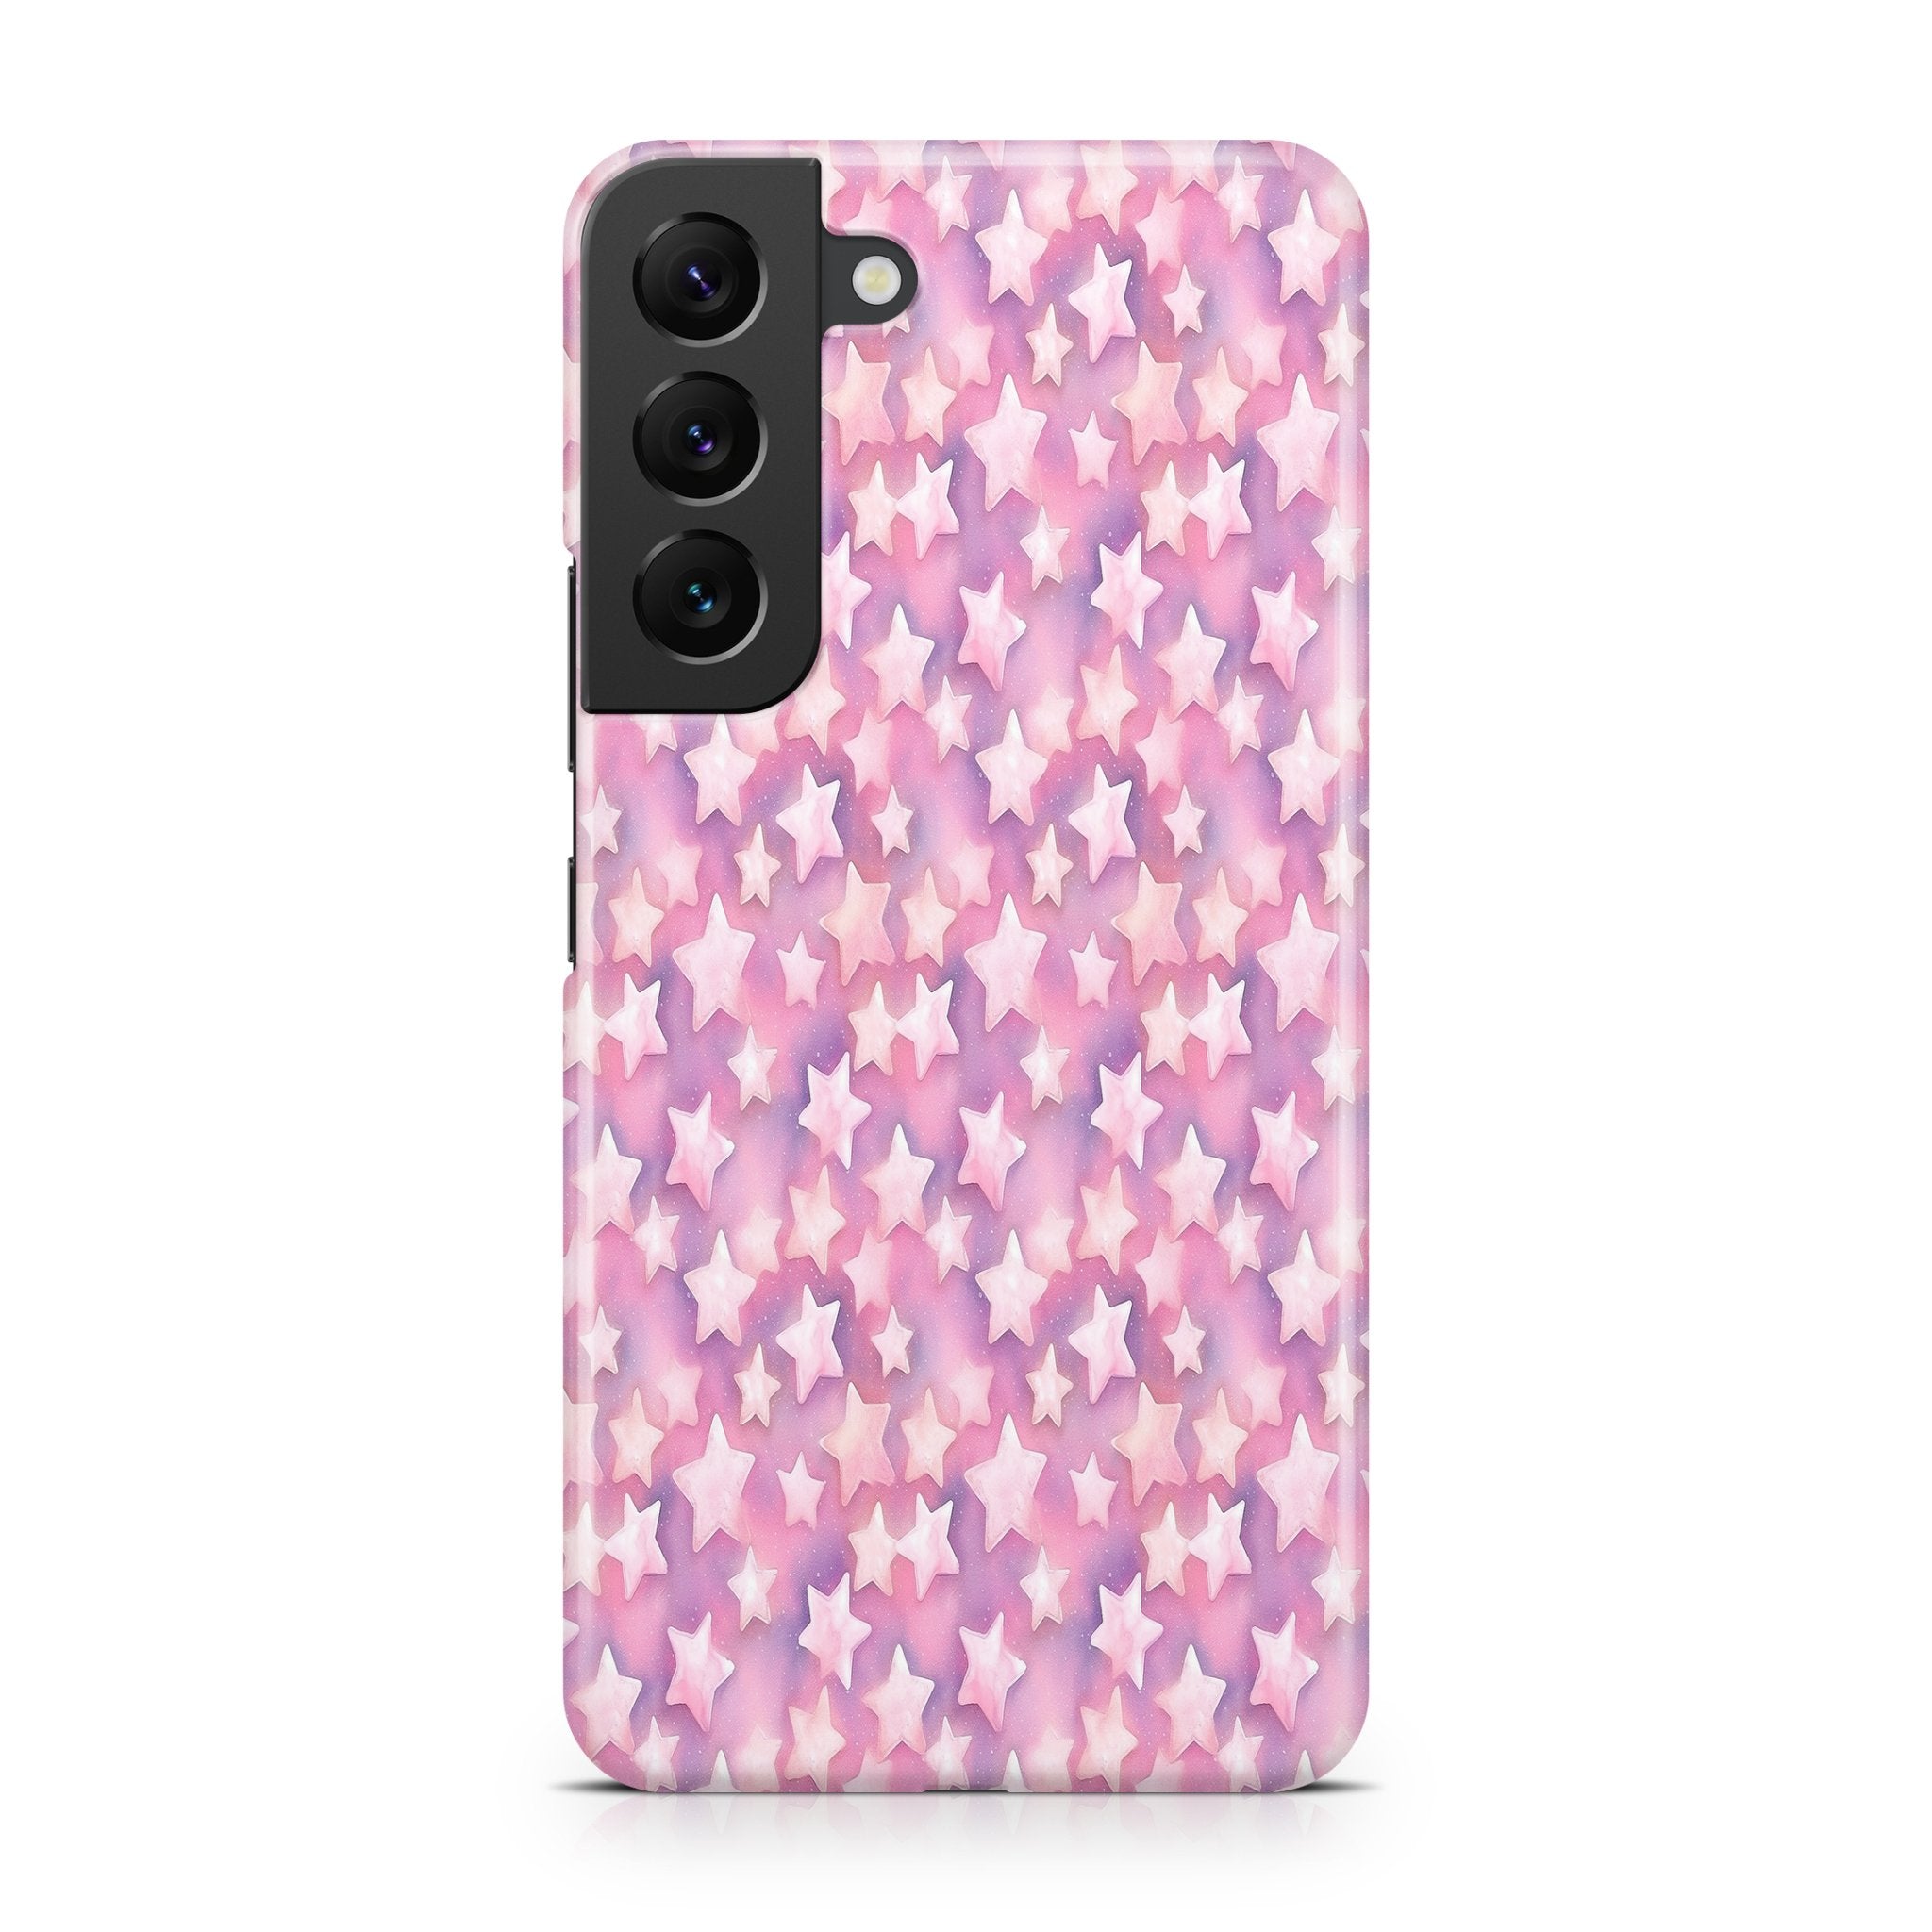 Dreamer Pink - Samsung phone case designs by CaseSwagger